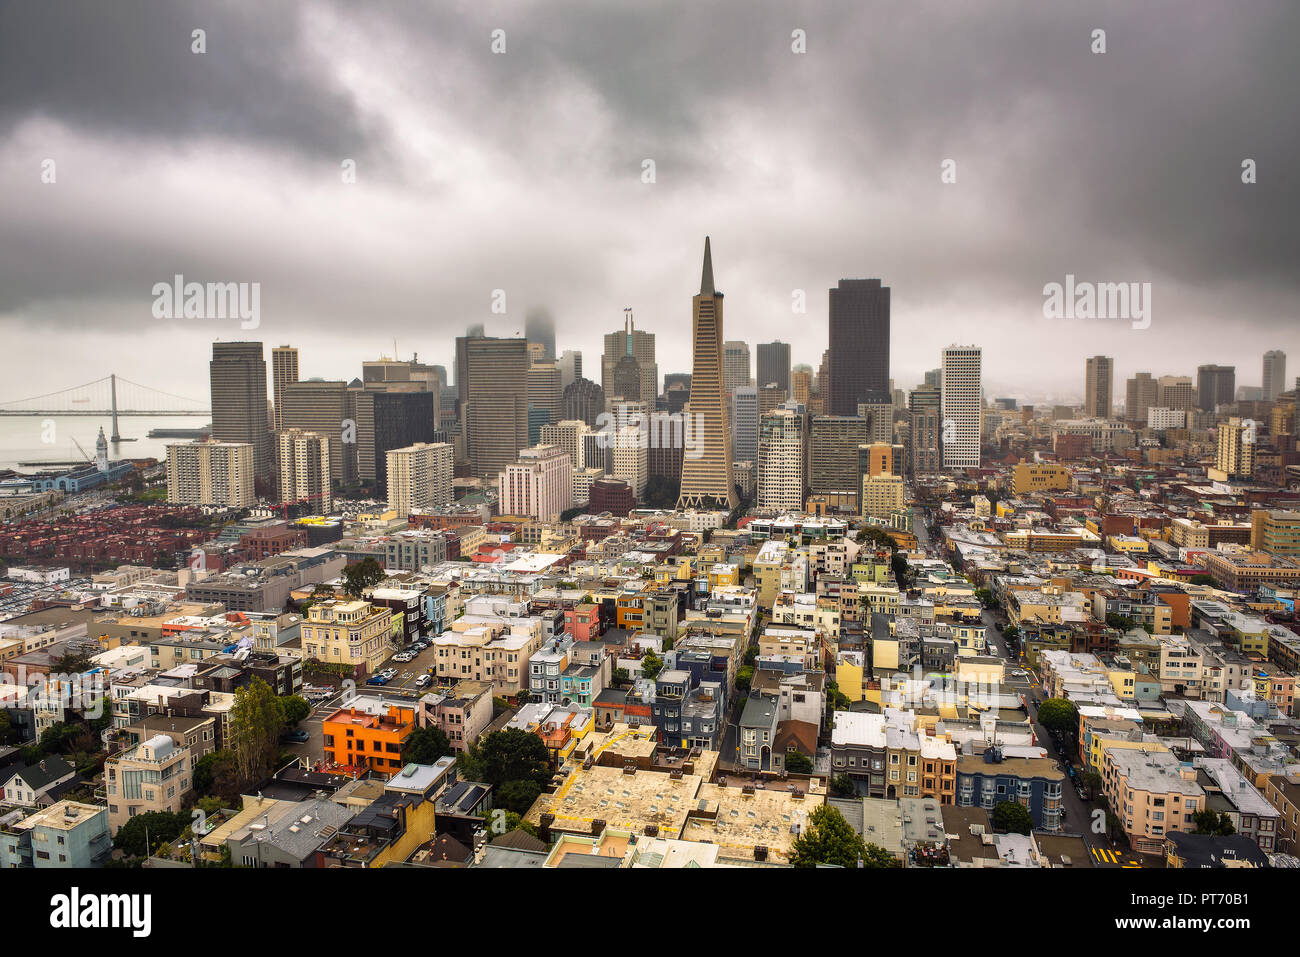 San Francisco downtown from above Stock Photo